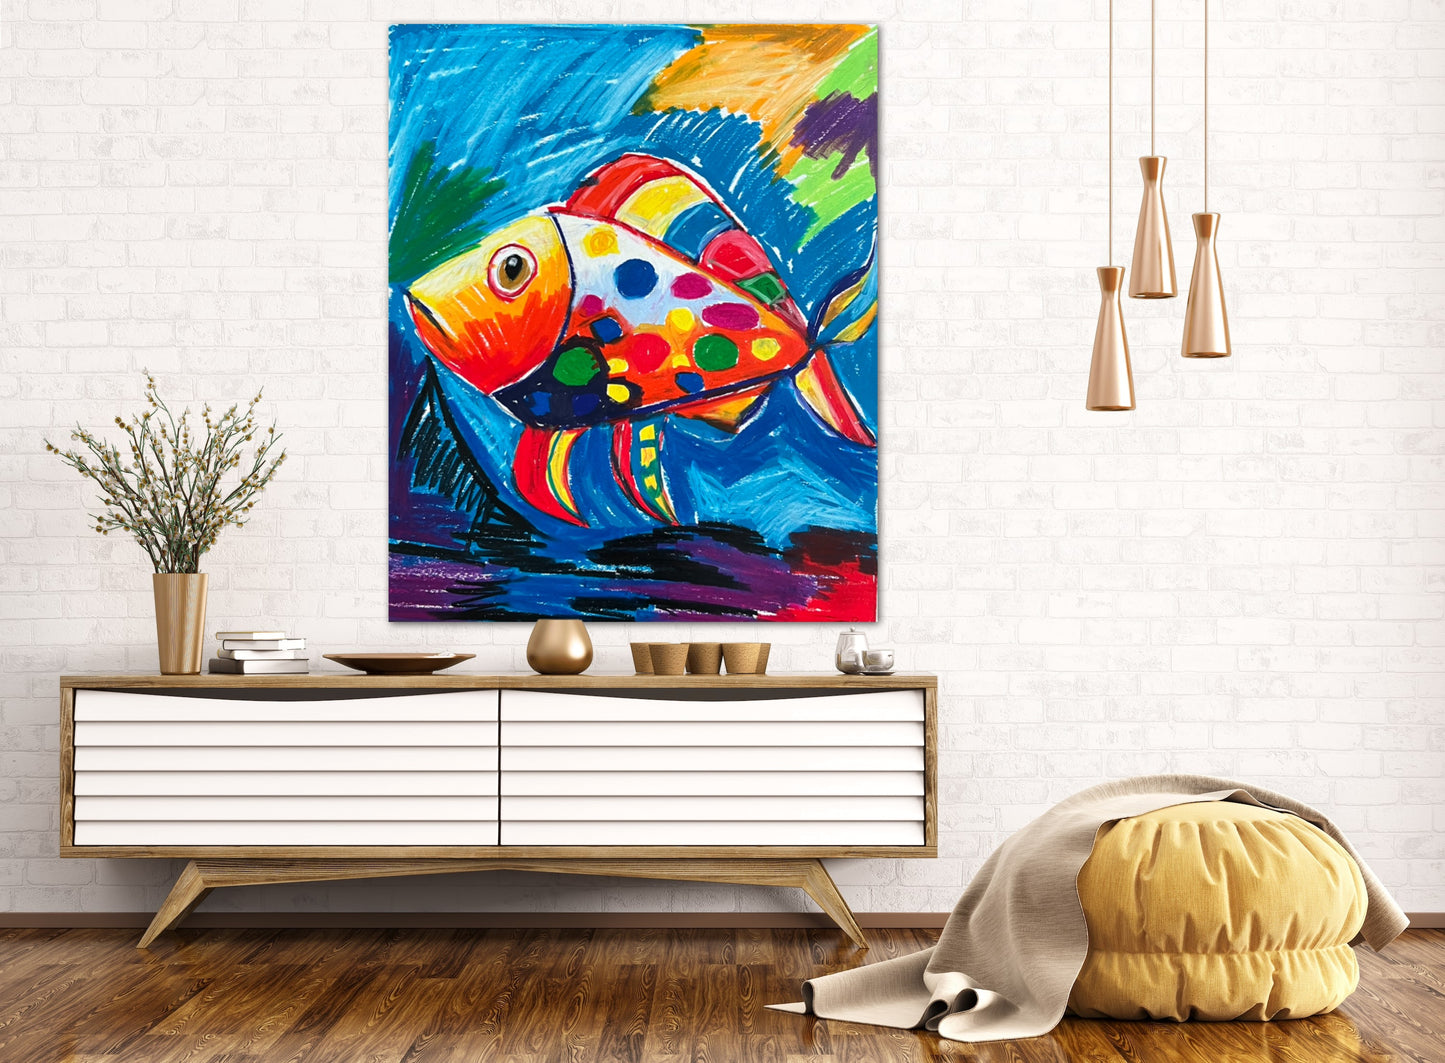 The Colorful Fish - Print, Poster, Stretched Canvas Print